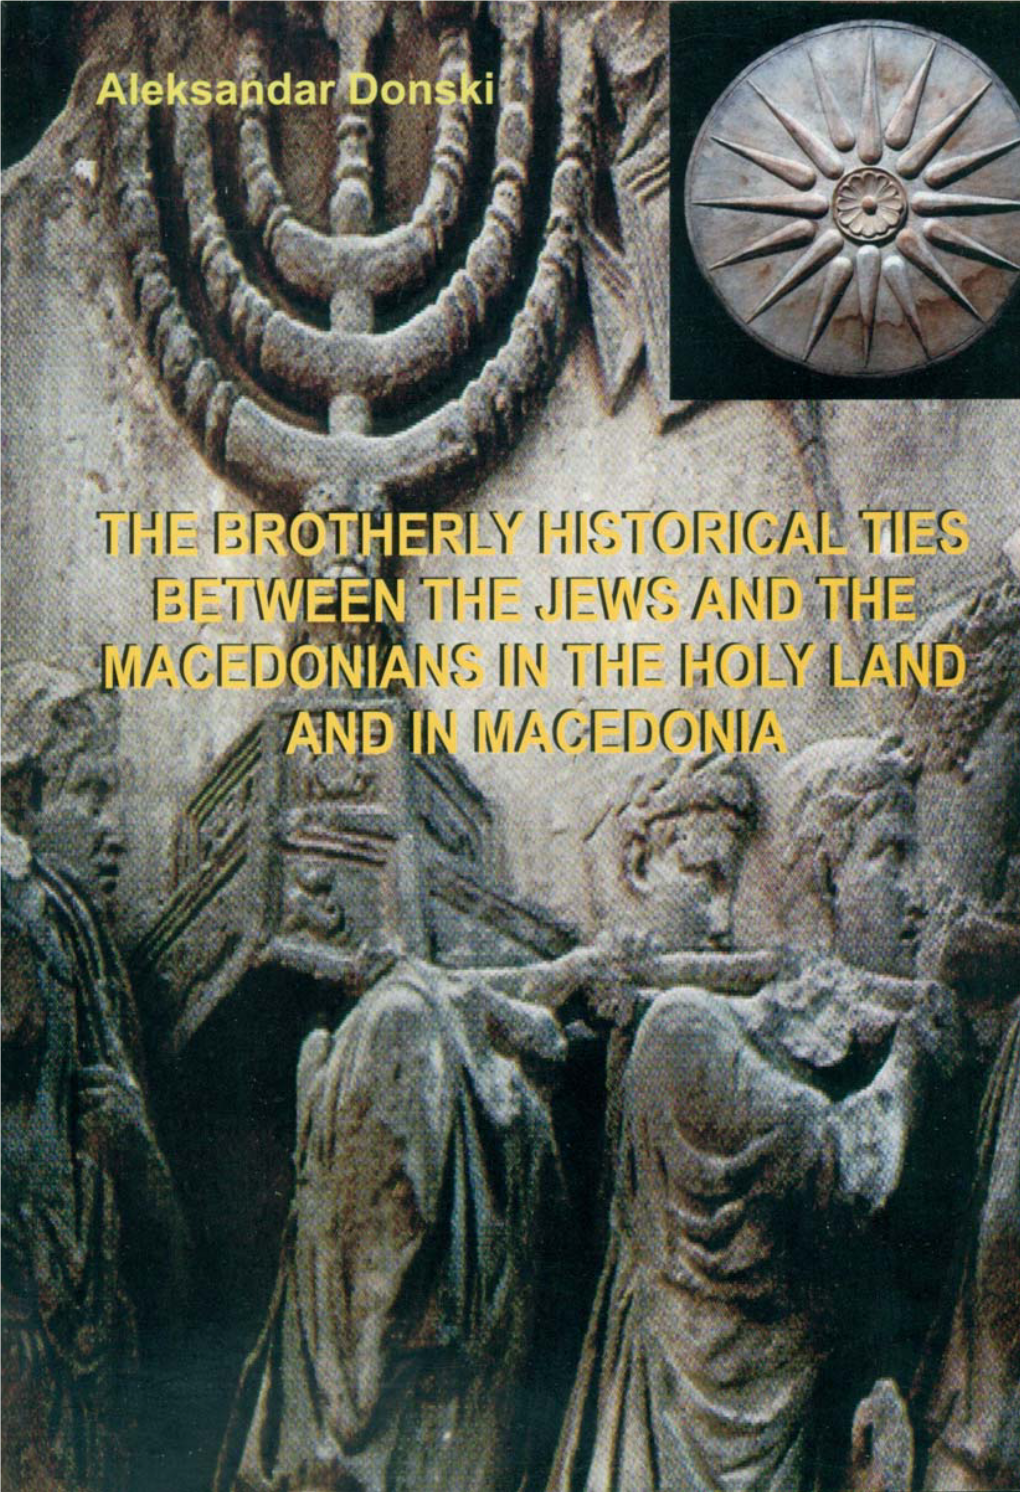 The Brotherly Historical Ties Between the Jews and the Macedonians in the Holy Land and Macedonia